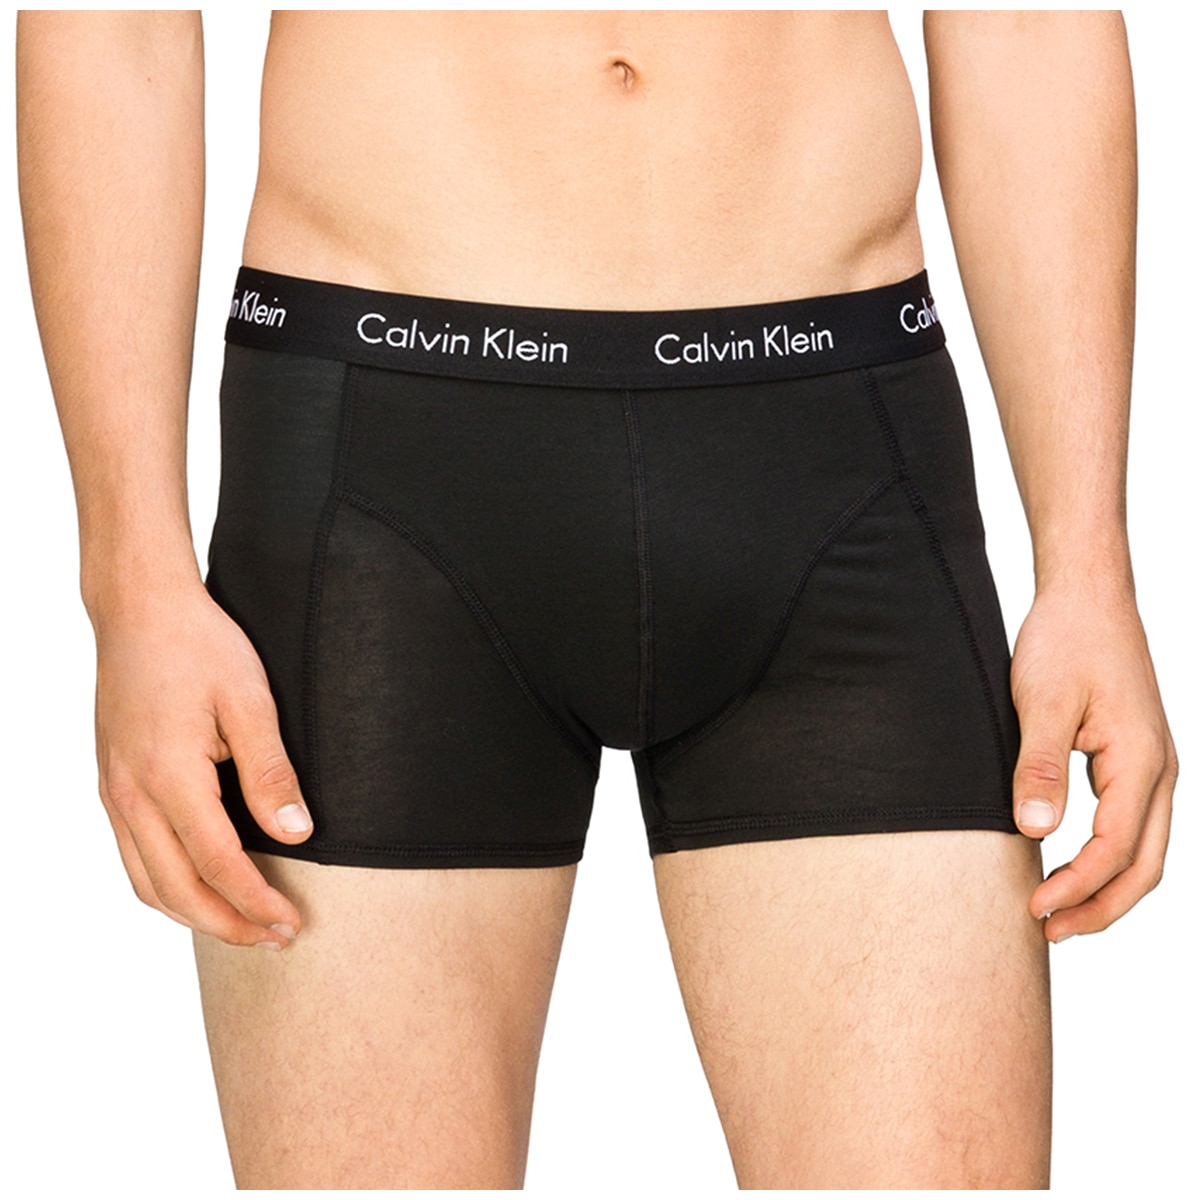 Ck Trunks - Black with Black band